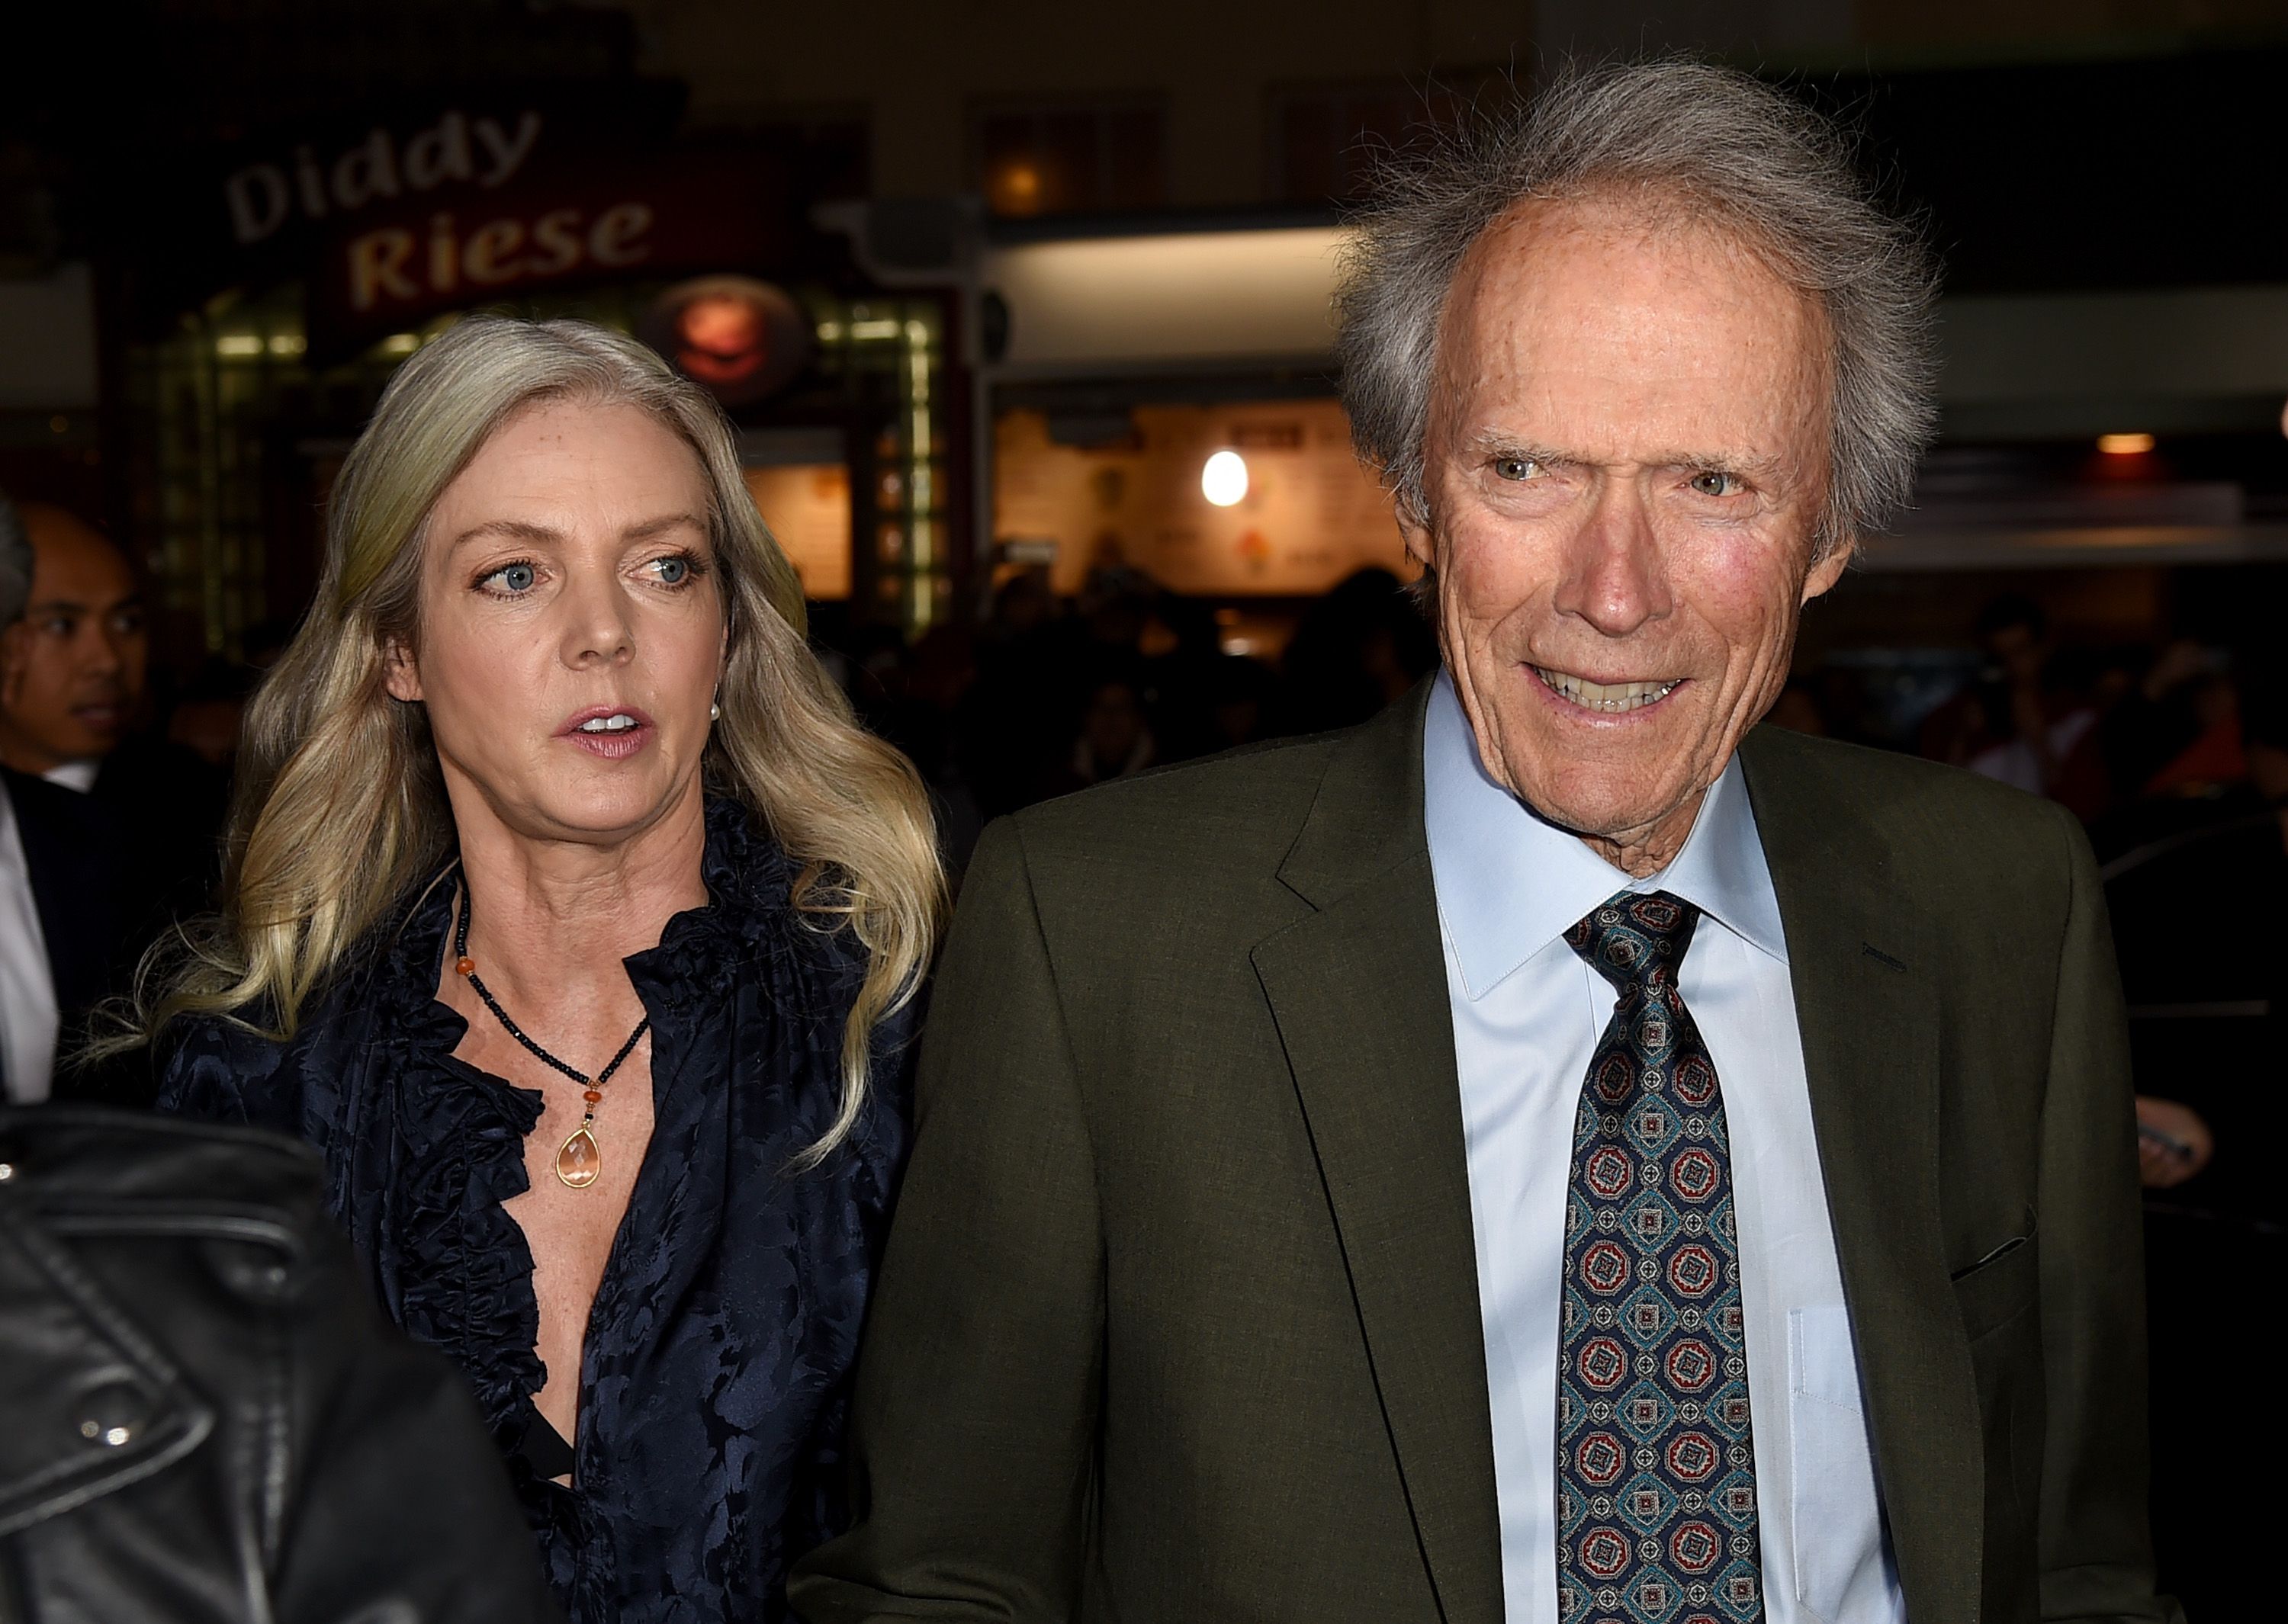 Christina Sandera and Clint Eastwood at the premiere of Warner Bros. Pictures' "The Mule" at the Village Theatre on December 10, 2018 | Photo: Getty Images